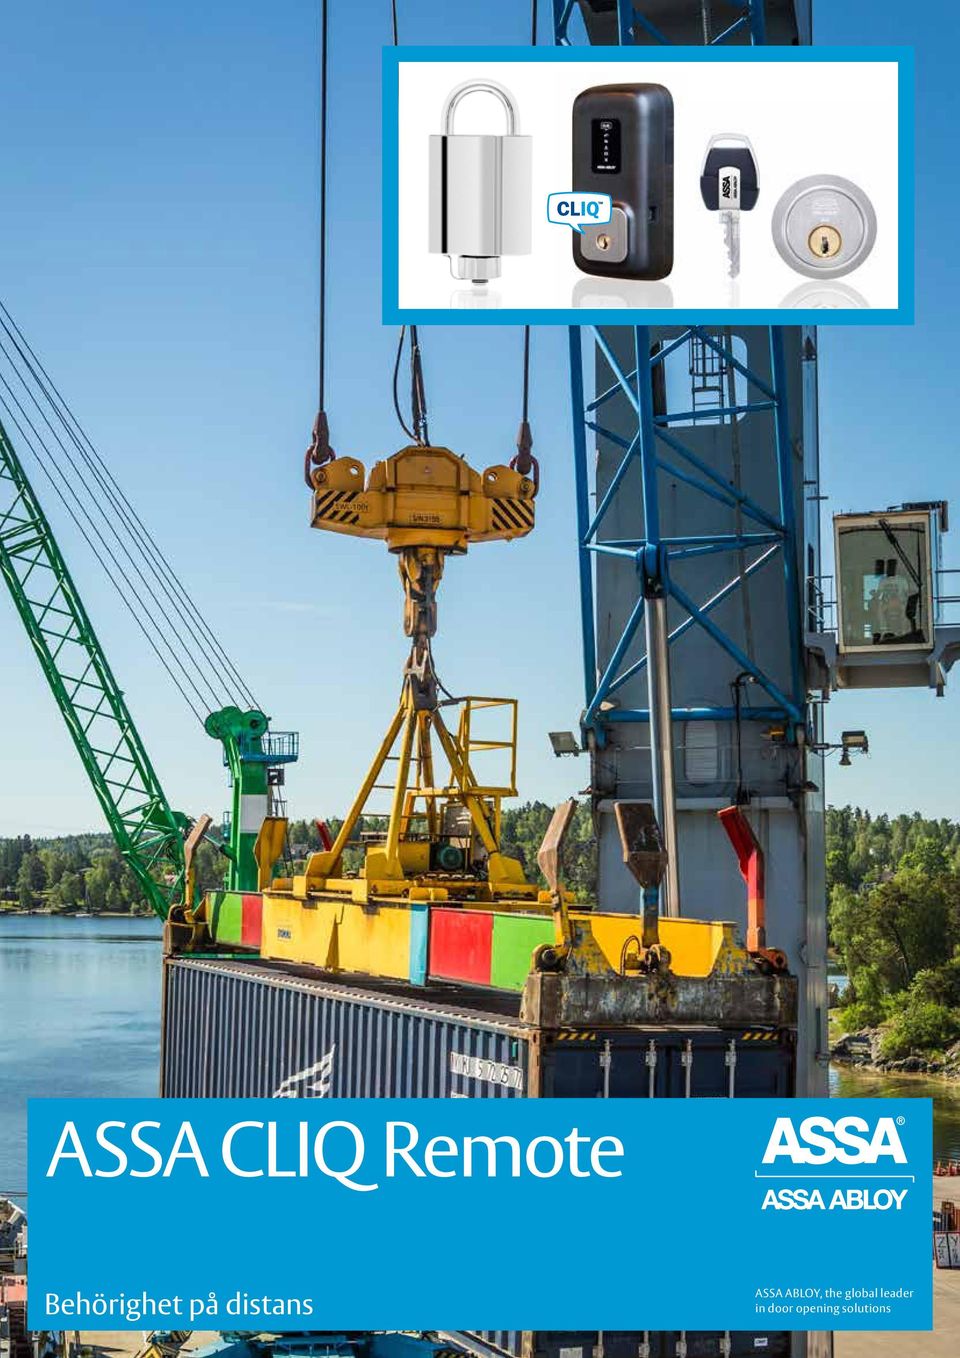 ASSA ABLOY, the global